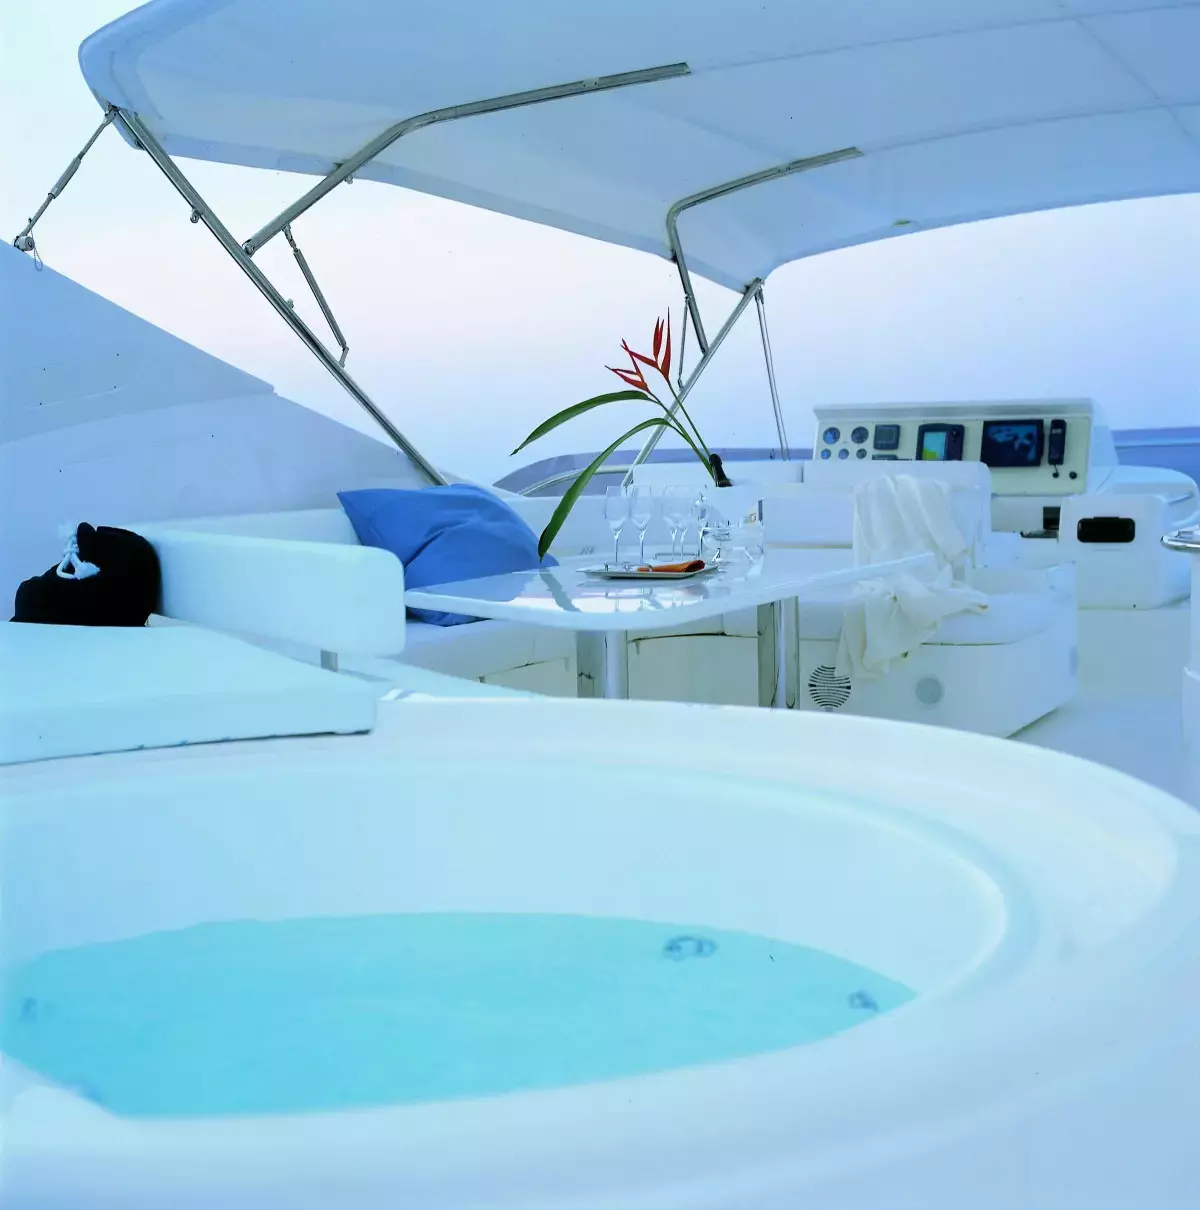 Day Off by Ferretti - Special Offer for a private Motor Yacht Charter in Mykonos with a crew